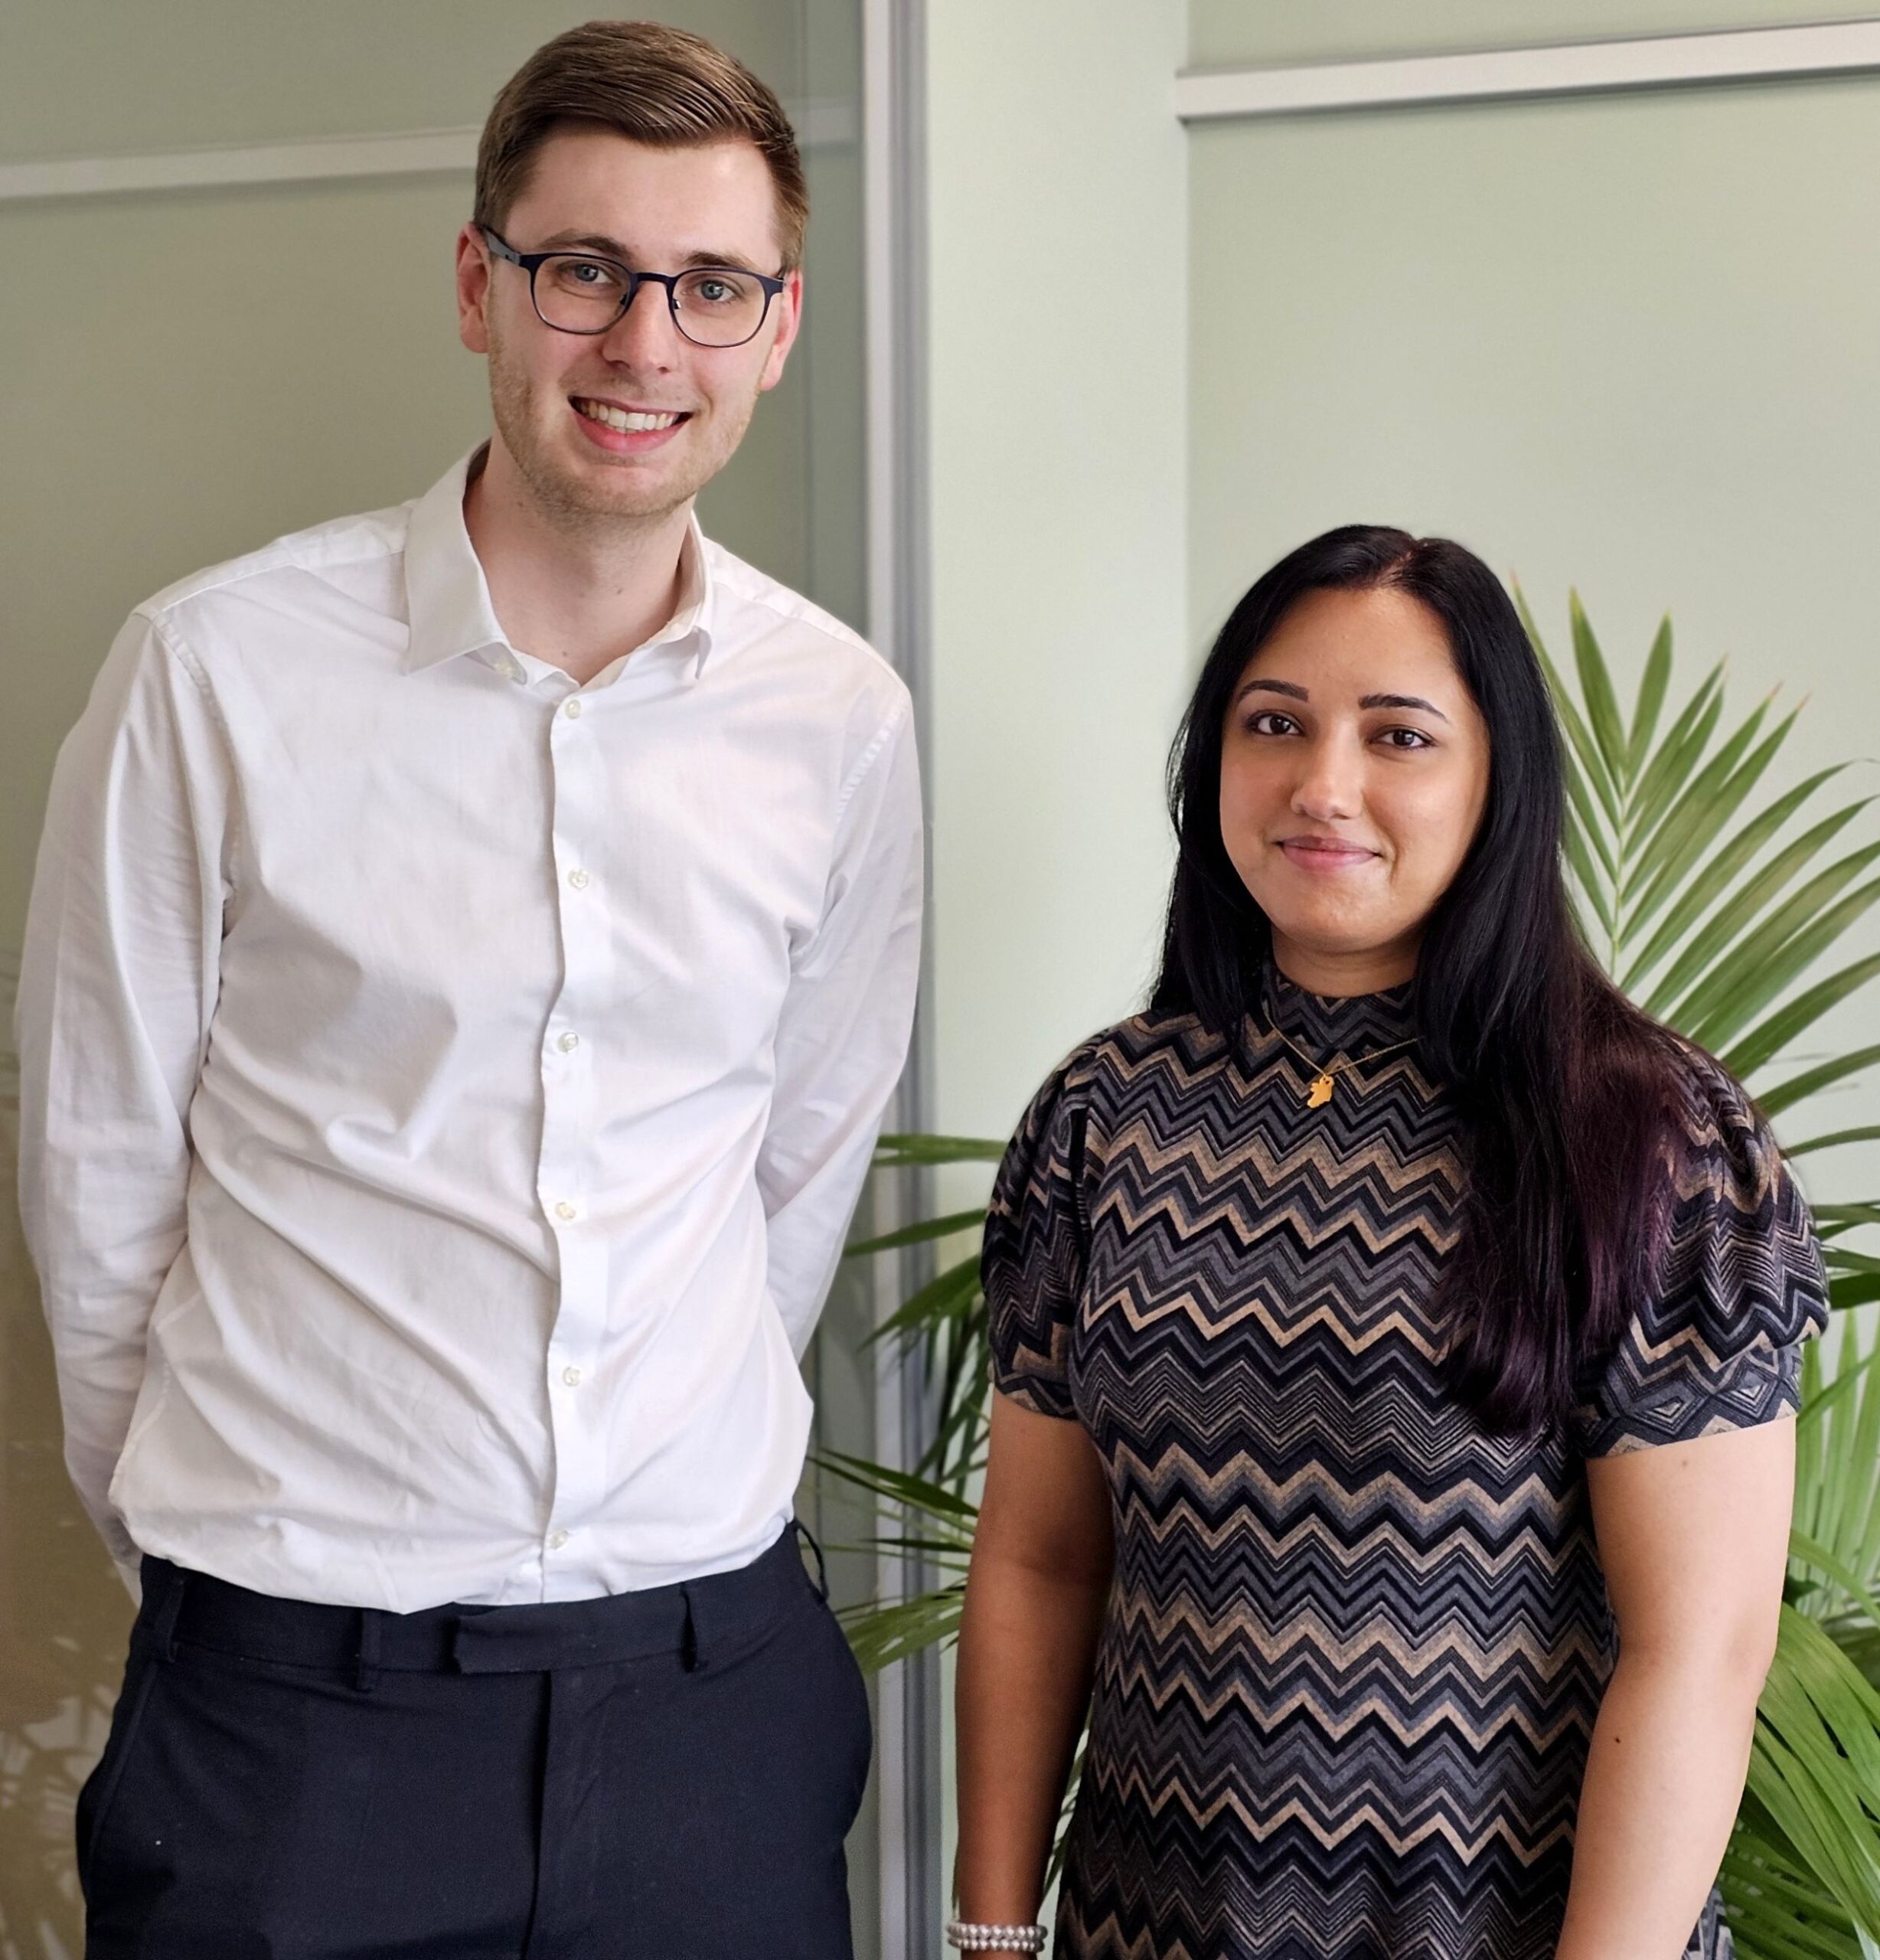 James Broomhead and Monisa Shahzad of RMT Healthcare